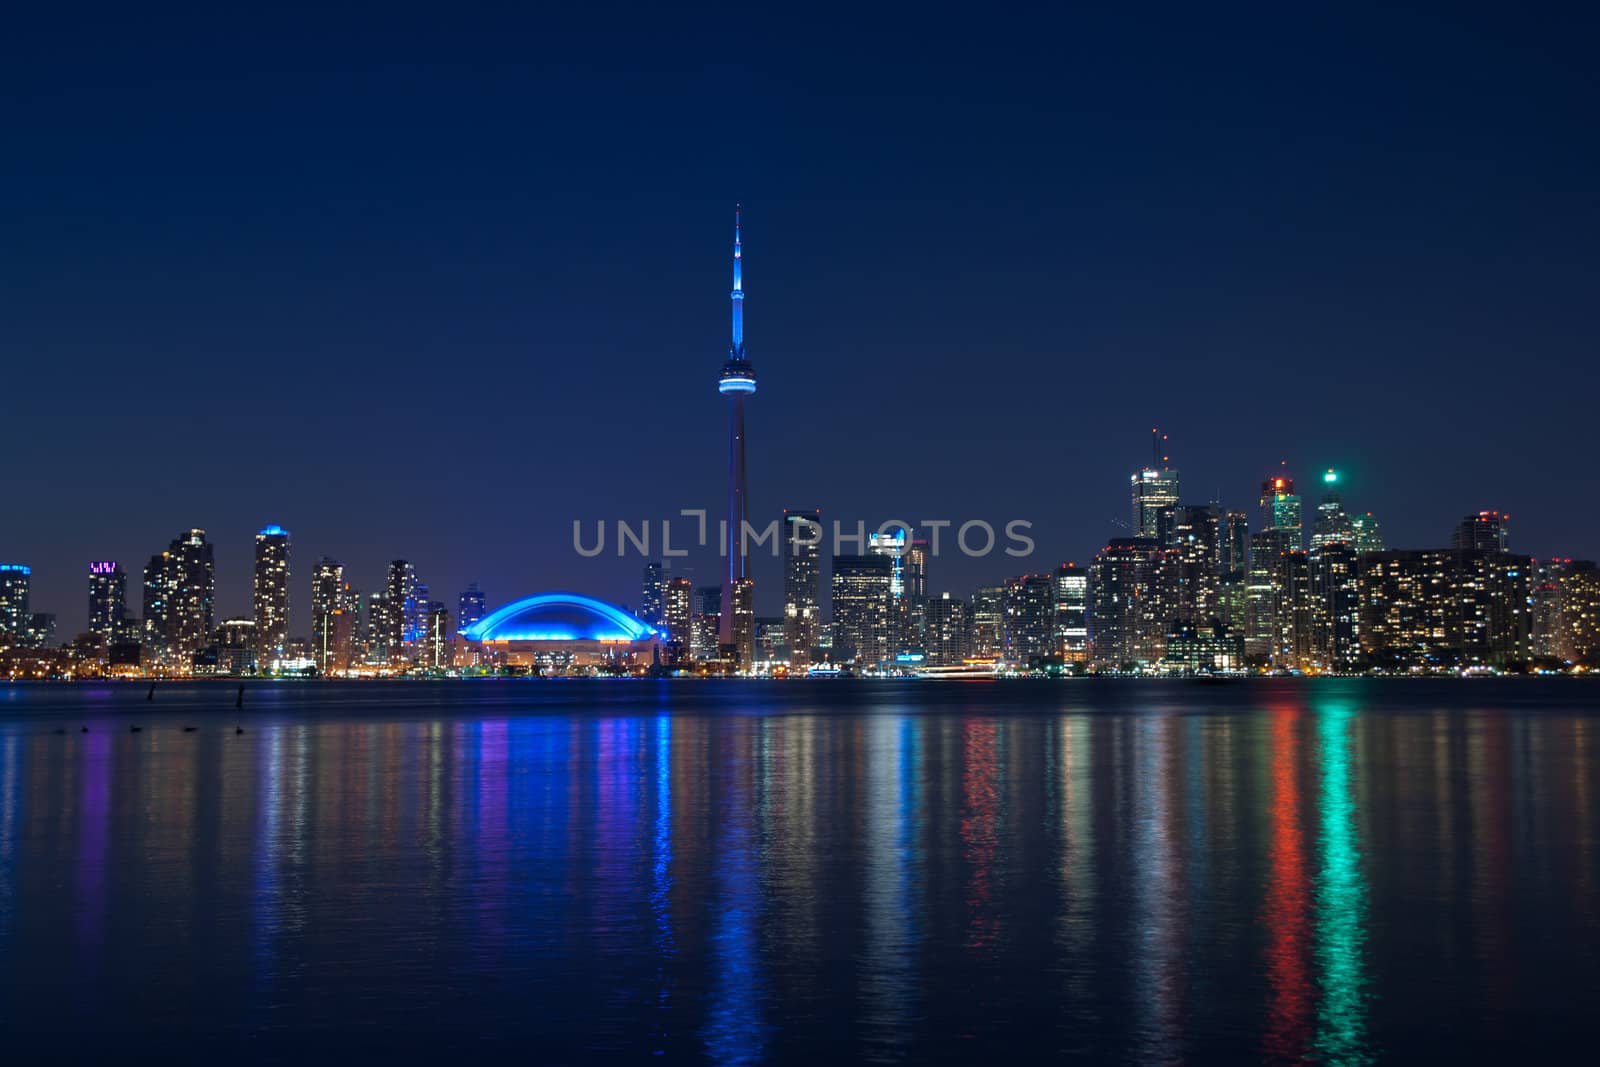 The landmark Toronto downtown view from the center island. Scenic view of the Tower illuminated by the iconic downtown skyline of skyscrapers and high rise condominiums reflecting in Lake Ontario 